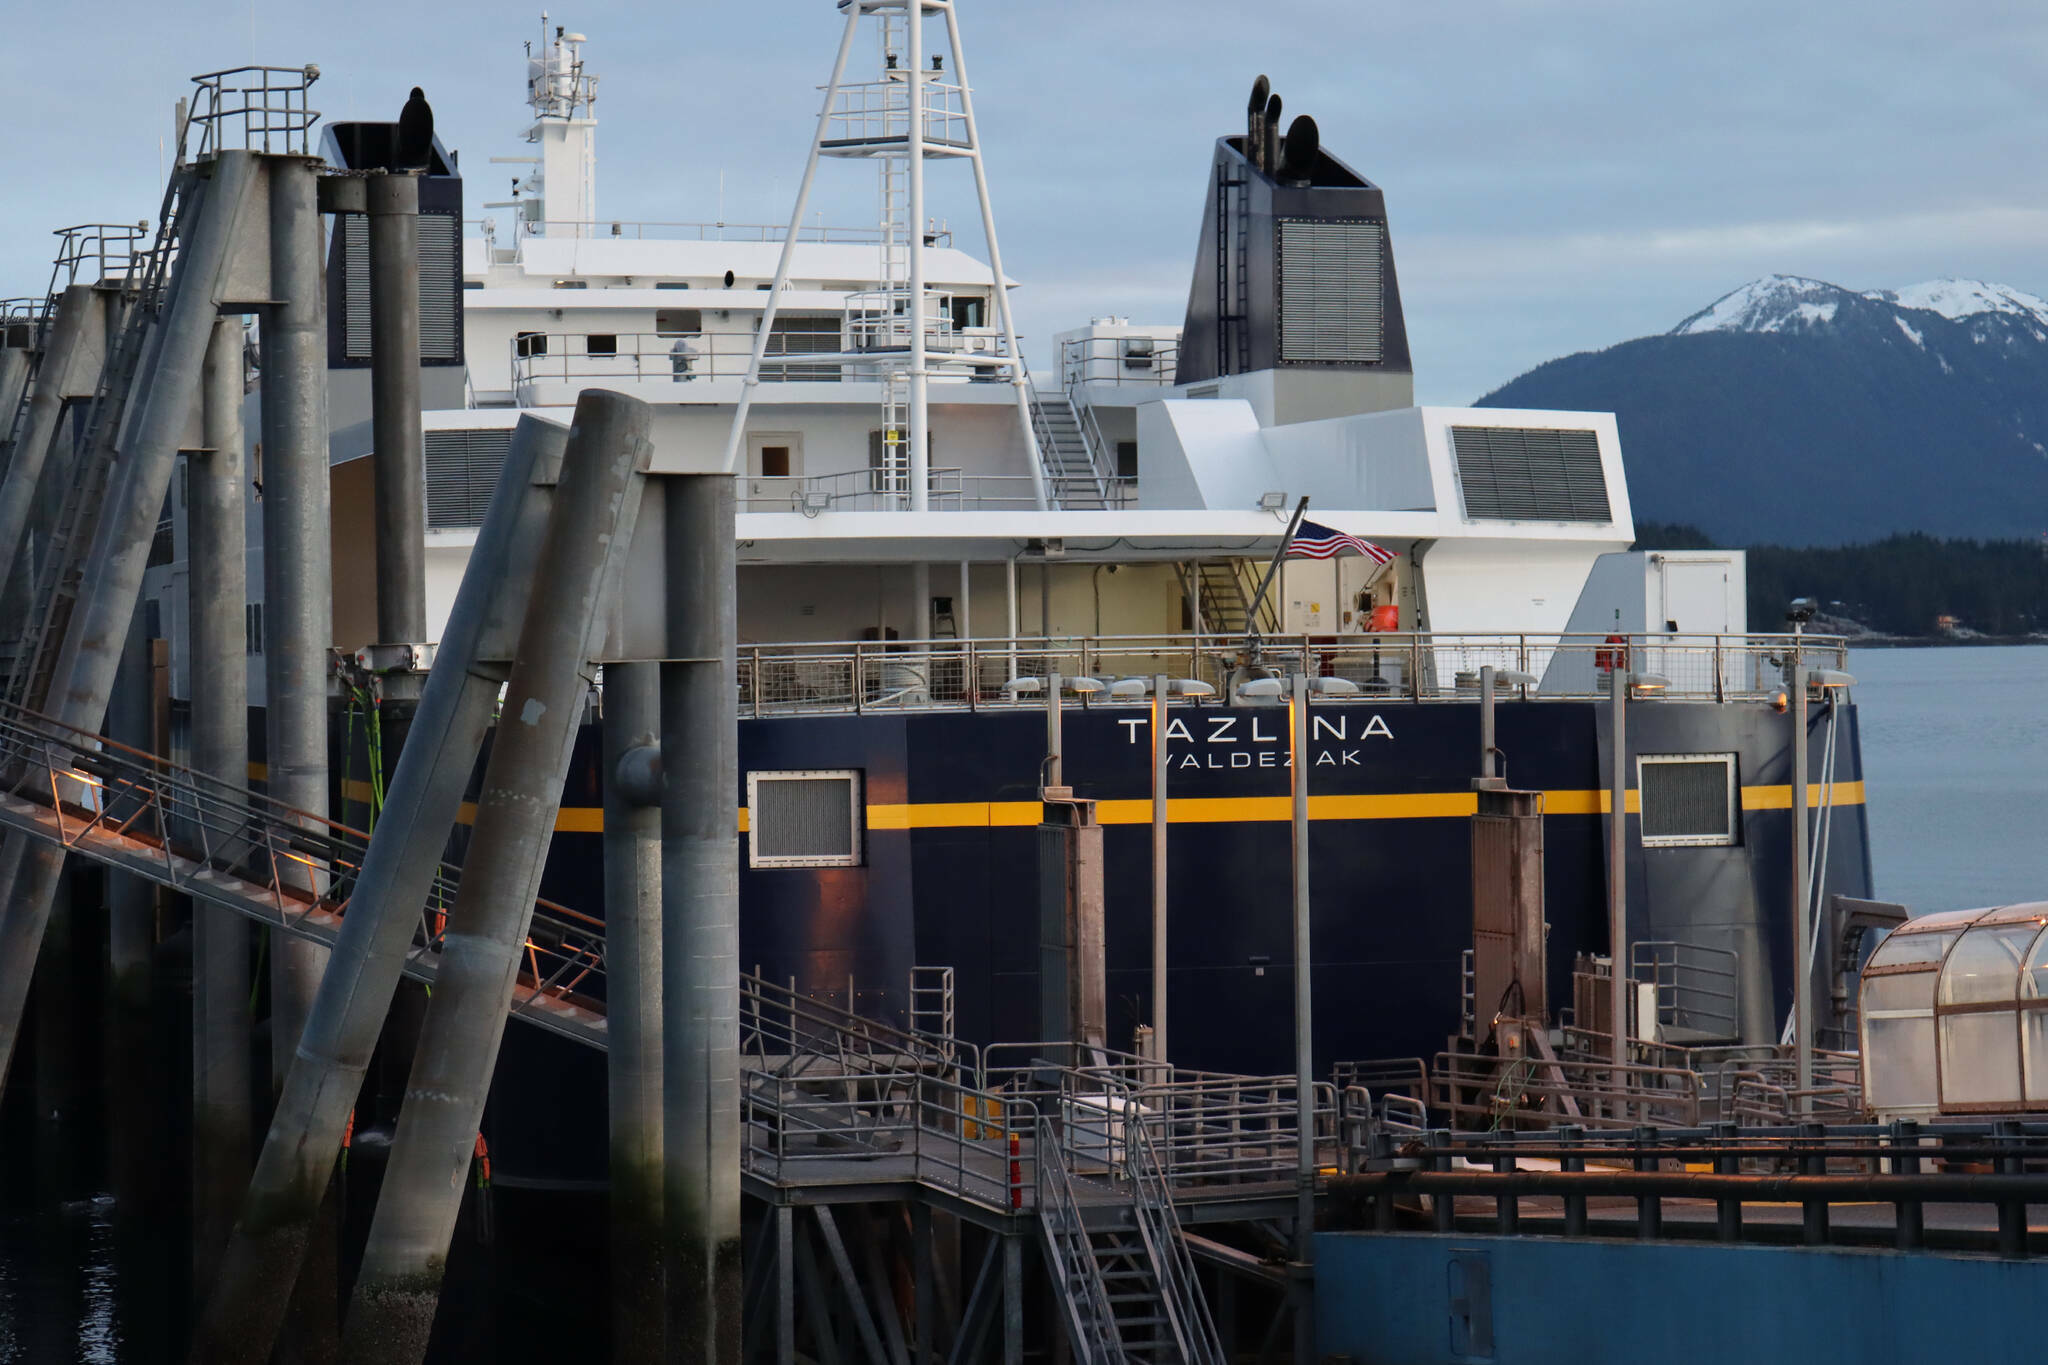 The Tazlina is docked at the Auke Bay ferry terminal in this November 2021 photo. The Alaska Marine Highway System announced an opportunity to submit written comments about the draft schedule summer schedule. The comment period is currently open and runs until Jan. 26. (Ben Hohenstatt / Juneau Empire File)